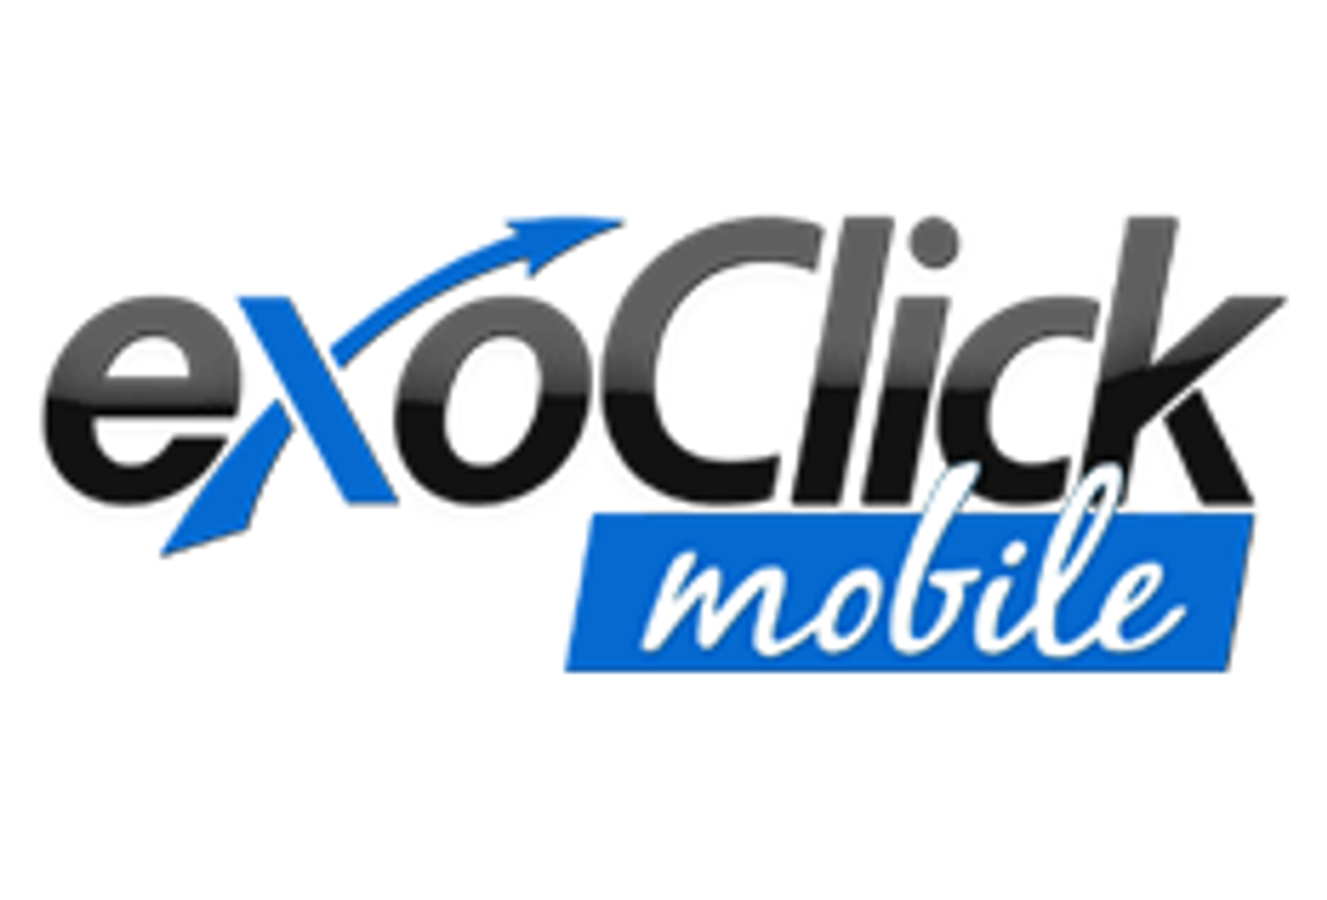 ExoClick Mobile